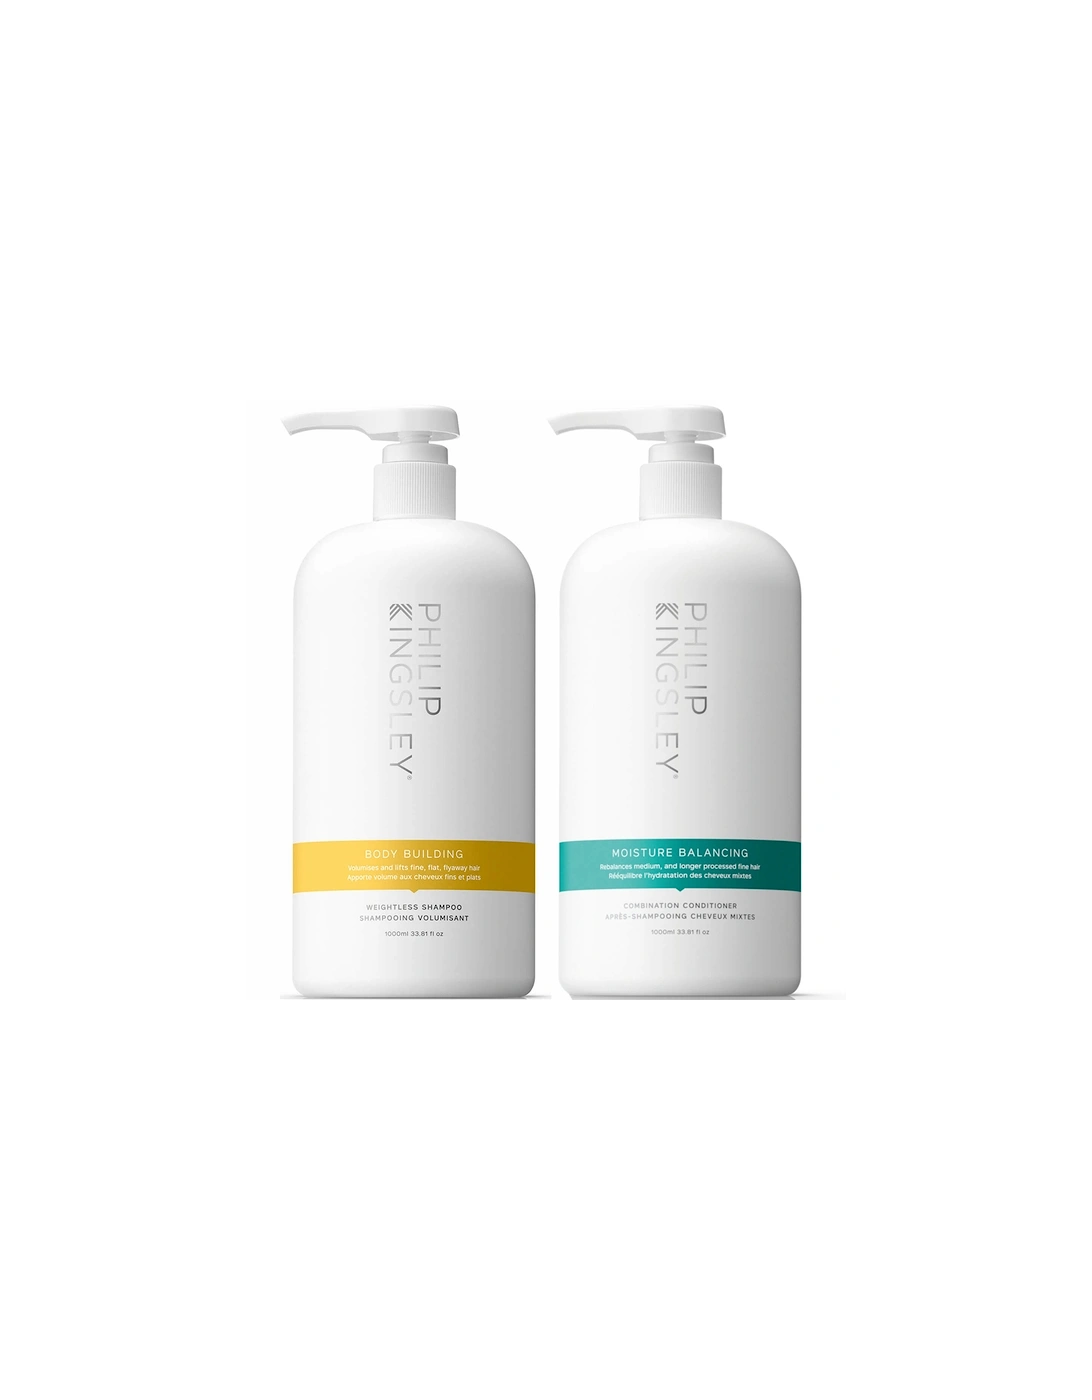 Body Building Shampoo 1000ml and Moisture Balancing Conditioner 1000ml Duo, 2 of 1